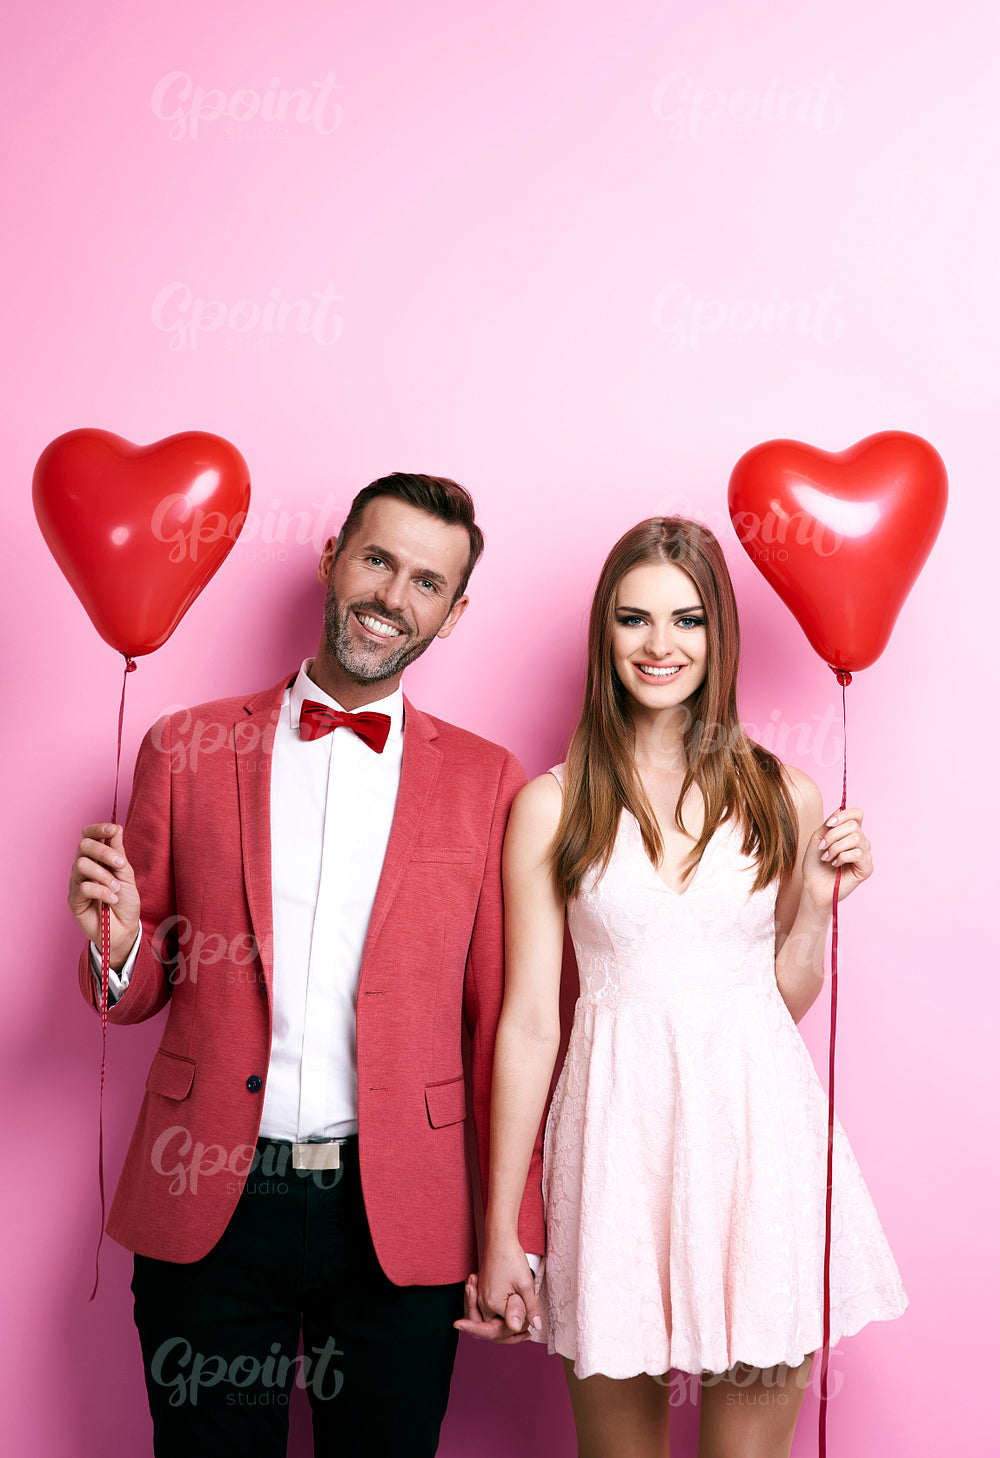 Affectionate couple with heart shape balloons holding hands